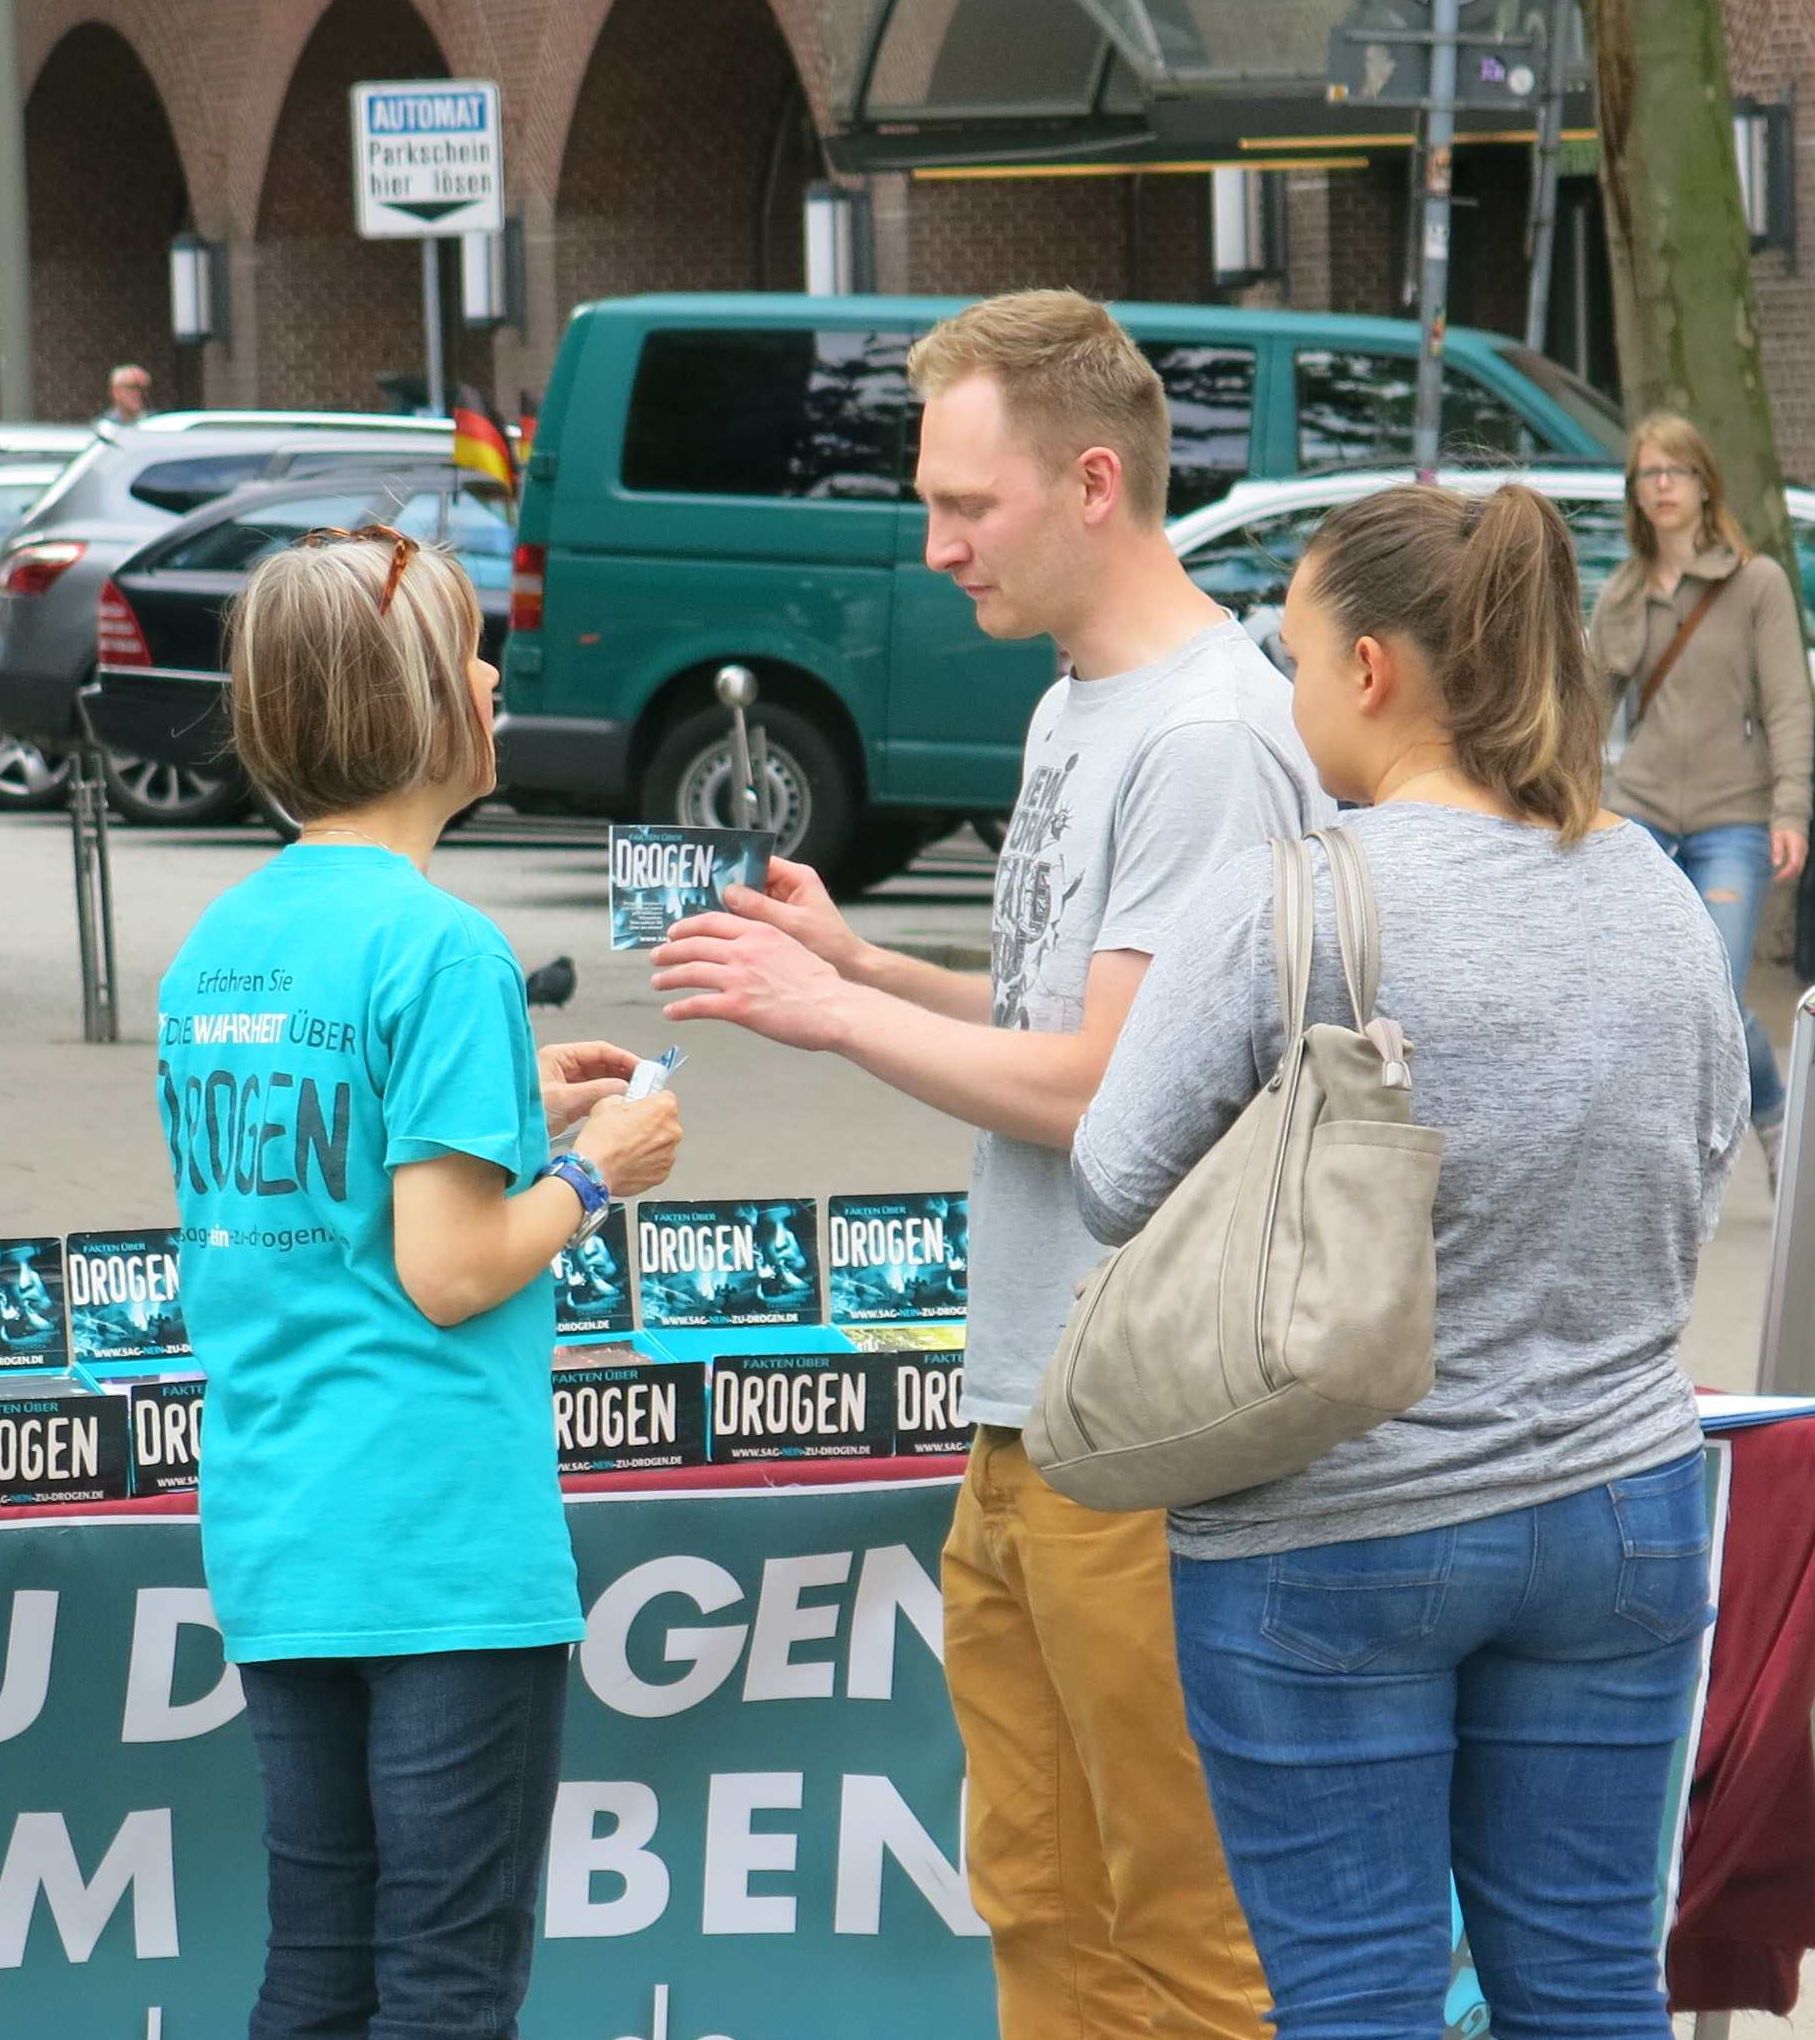 A volunteer from the Church of Scientology of Hamburg shows The Truth About Drugs booklet to a visitor to a drug education information booth.